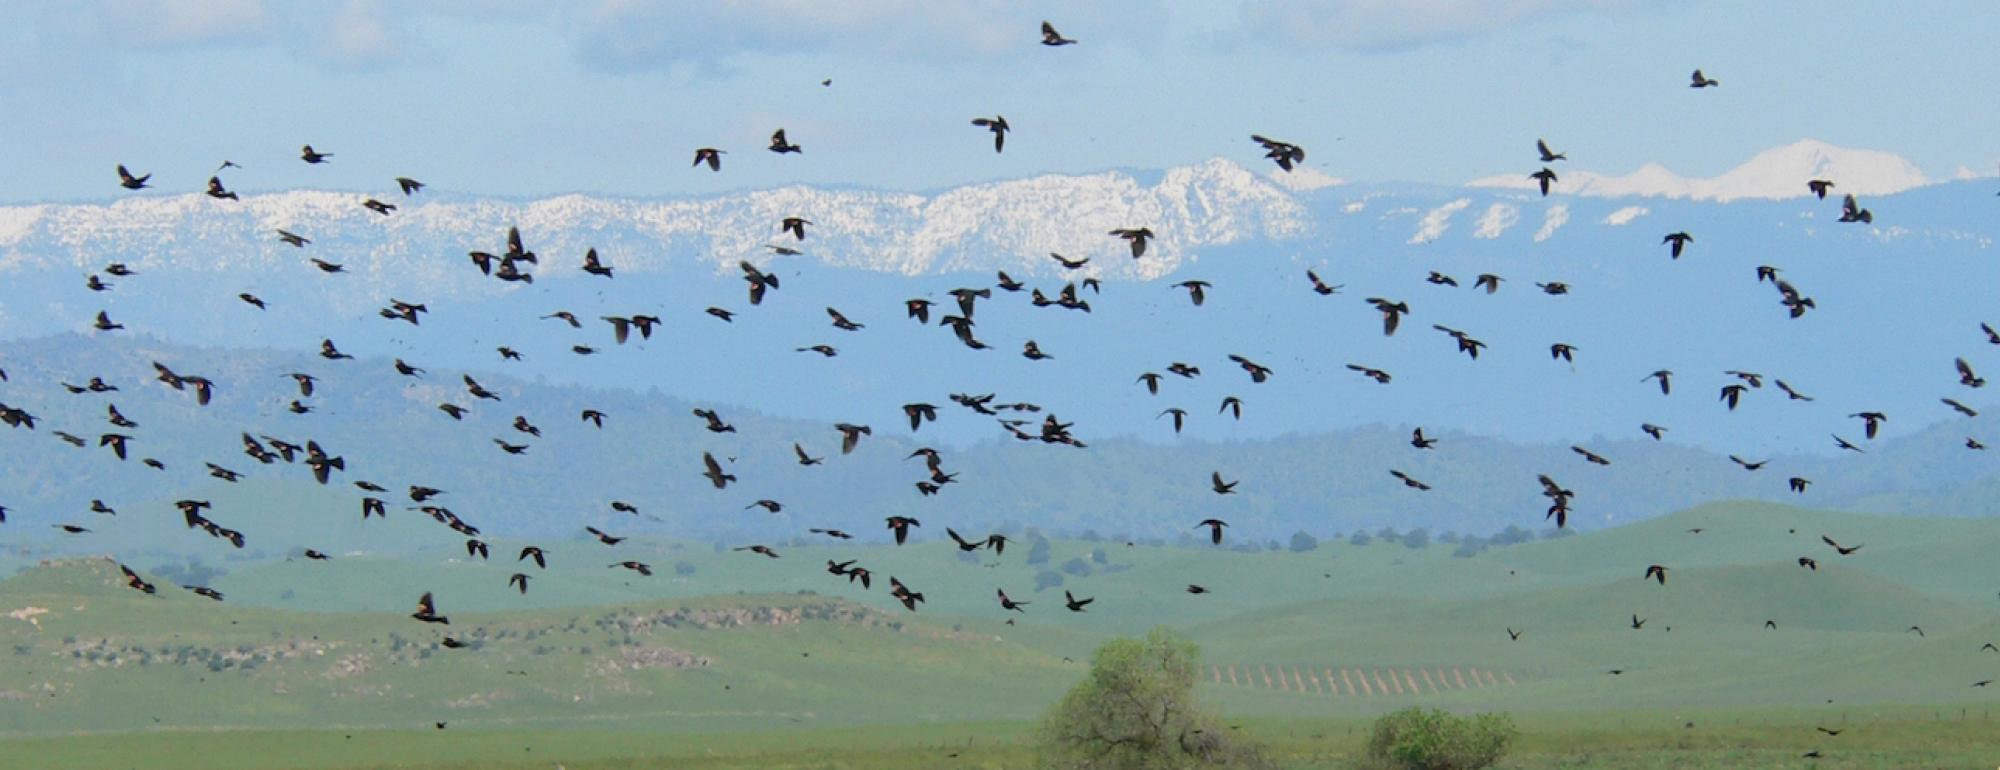 A flock of Tricolored Blackbirds flying over California meadows with the Sierra mountain range in the background